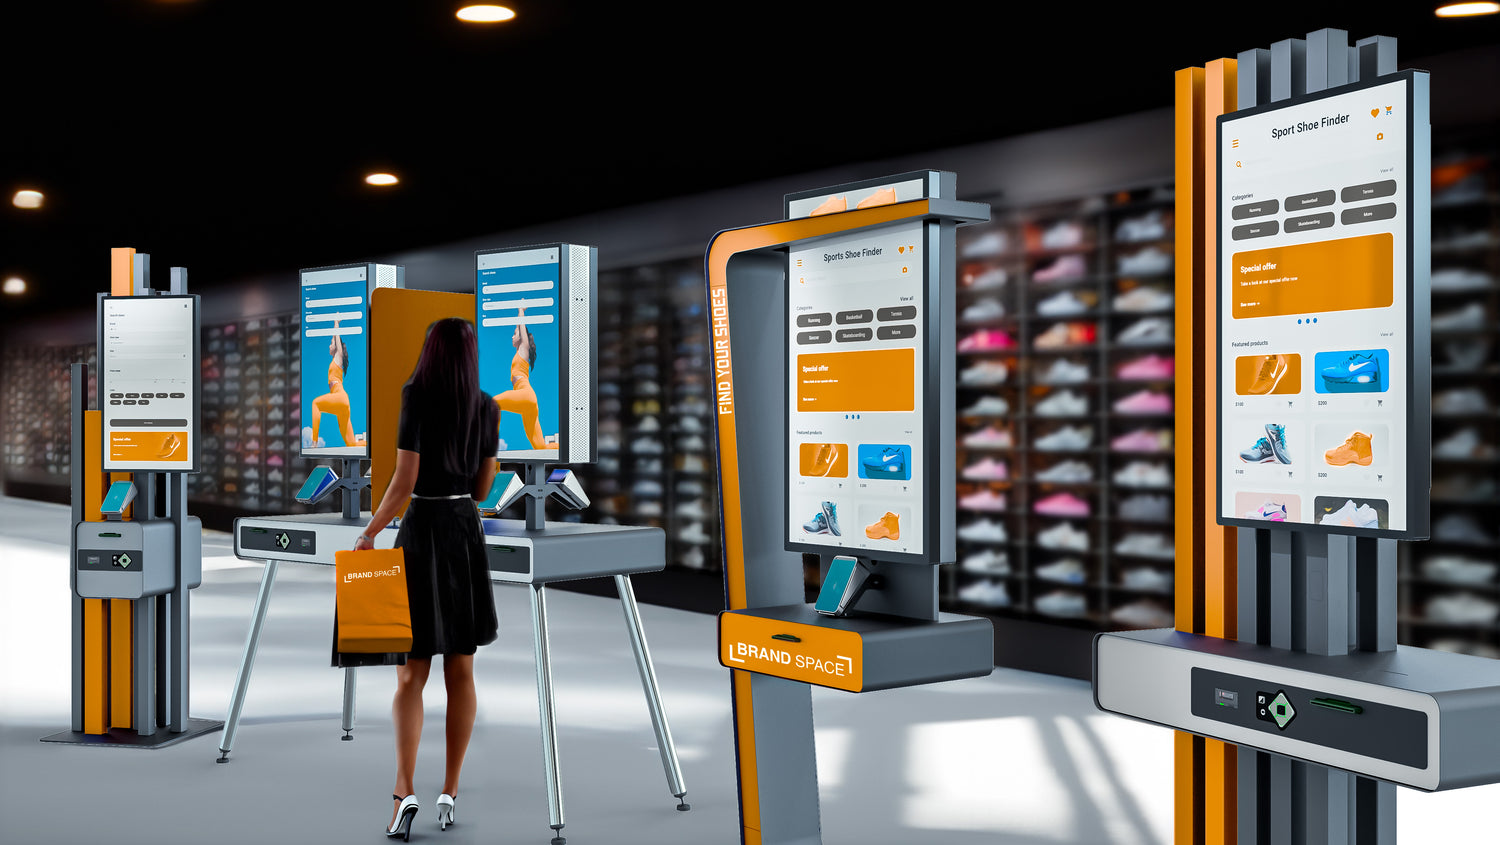 Self-Service Kiosk in Sports Retail - What's the Catch?